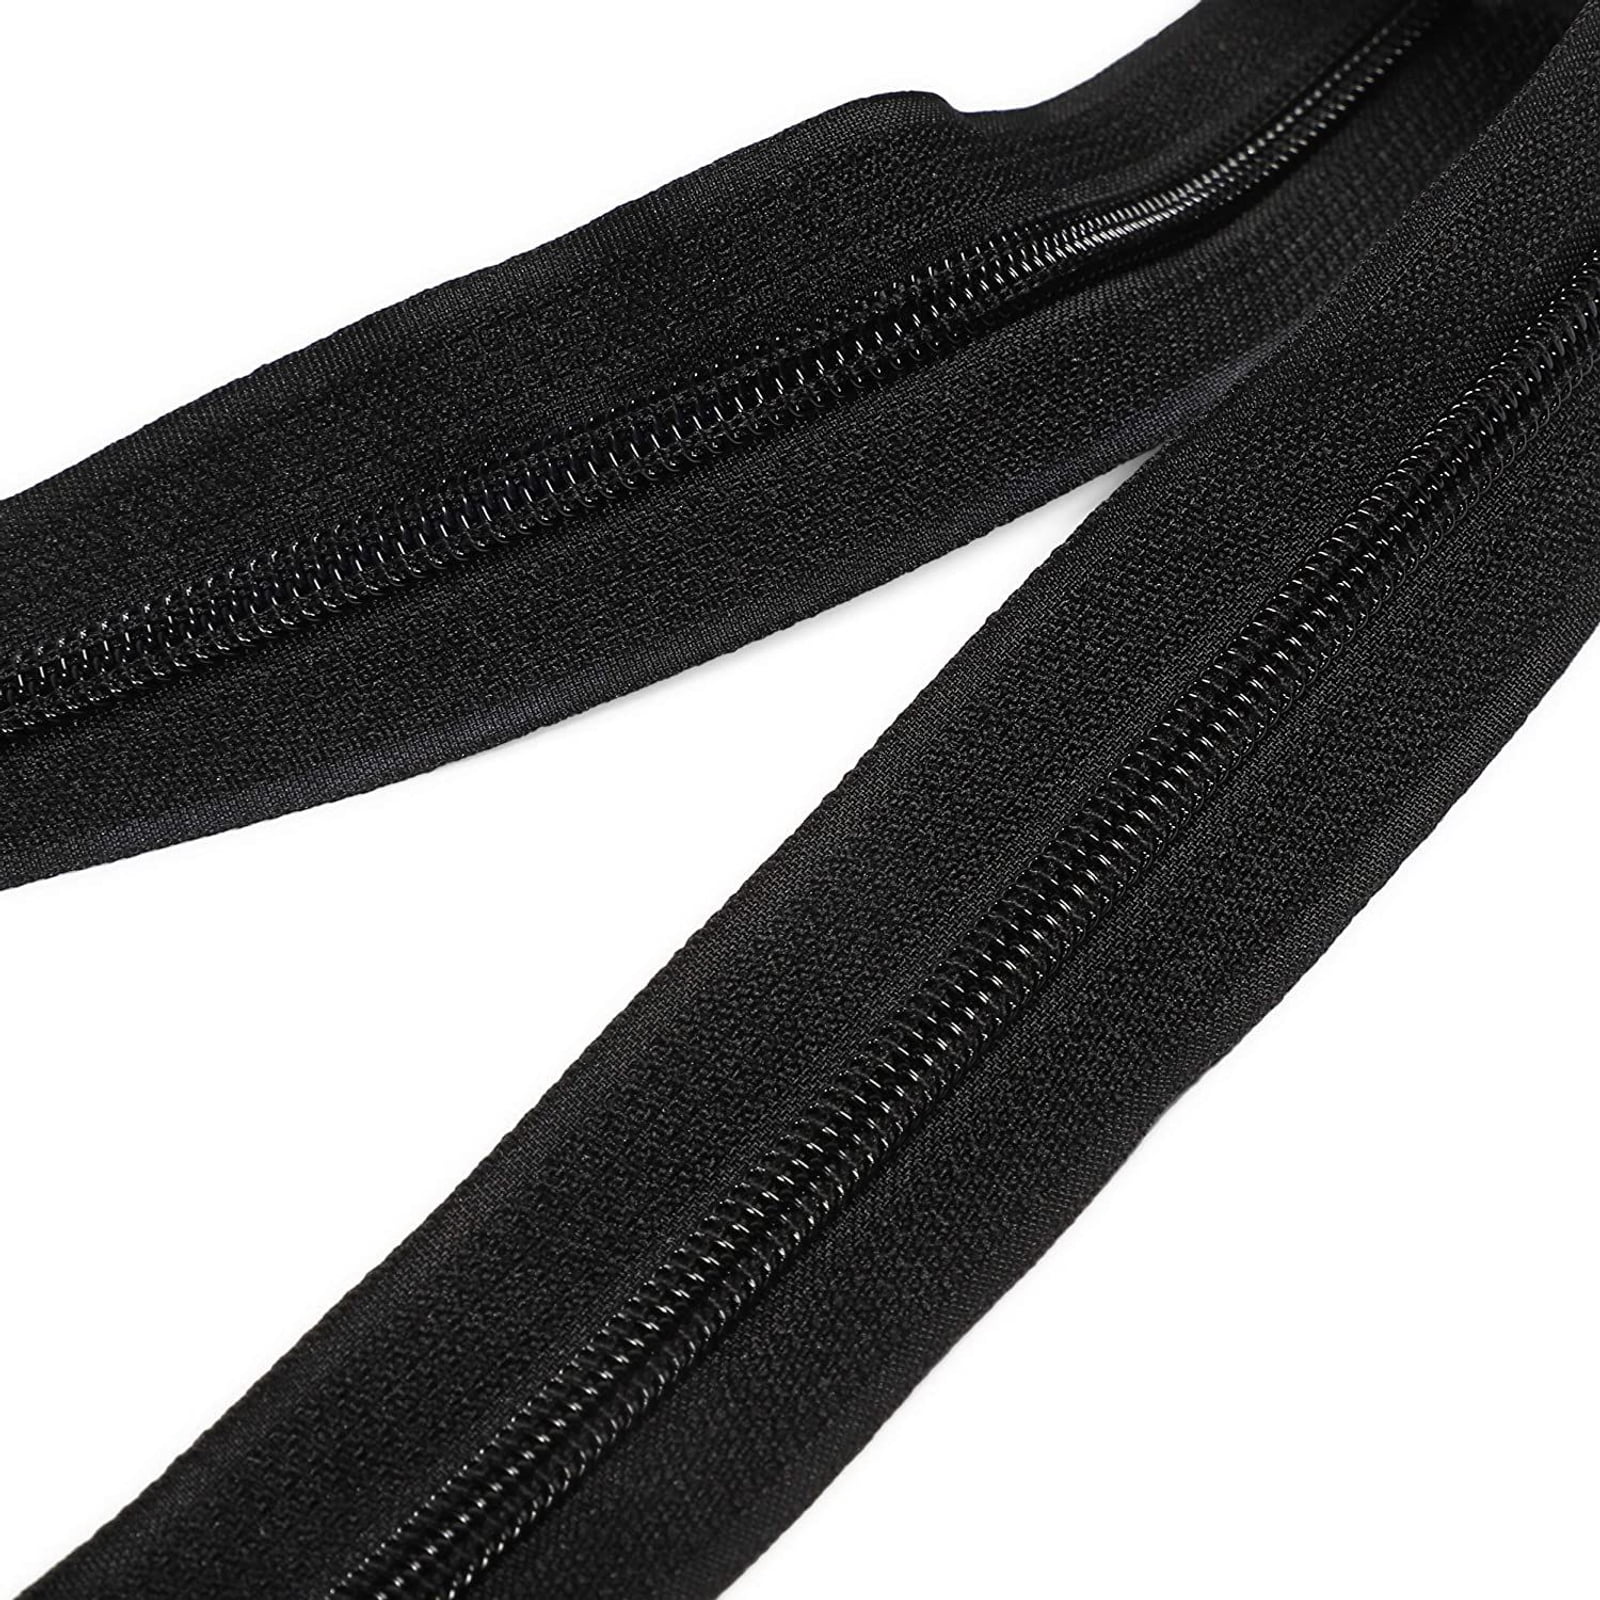 5Yards Bulk Zipper, #5 Zippers for Sewing, Black Nylon Coil Zipper by The  Yards, Replacement Sewing Zipper with 20PCS Zipper Sliders for DIY Sewing  Craft Bags by MiniRed (#5 Black)